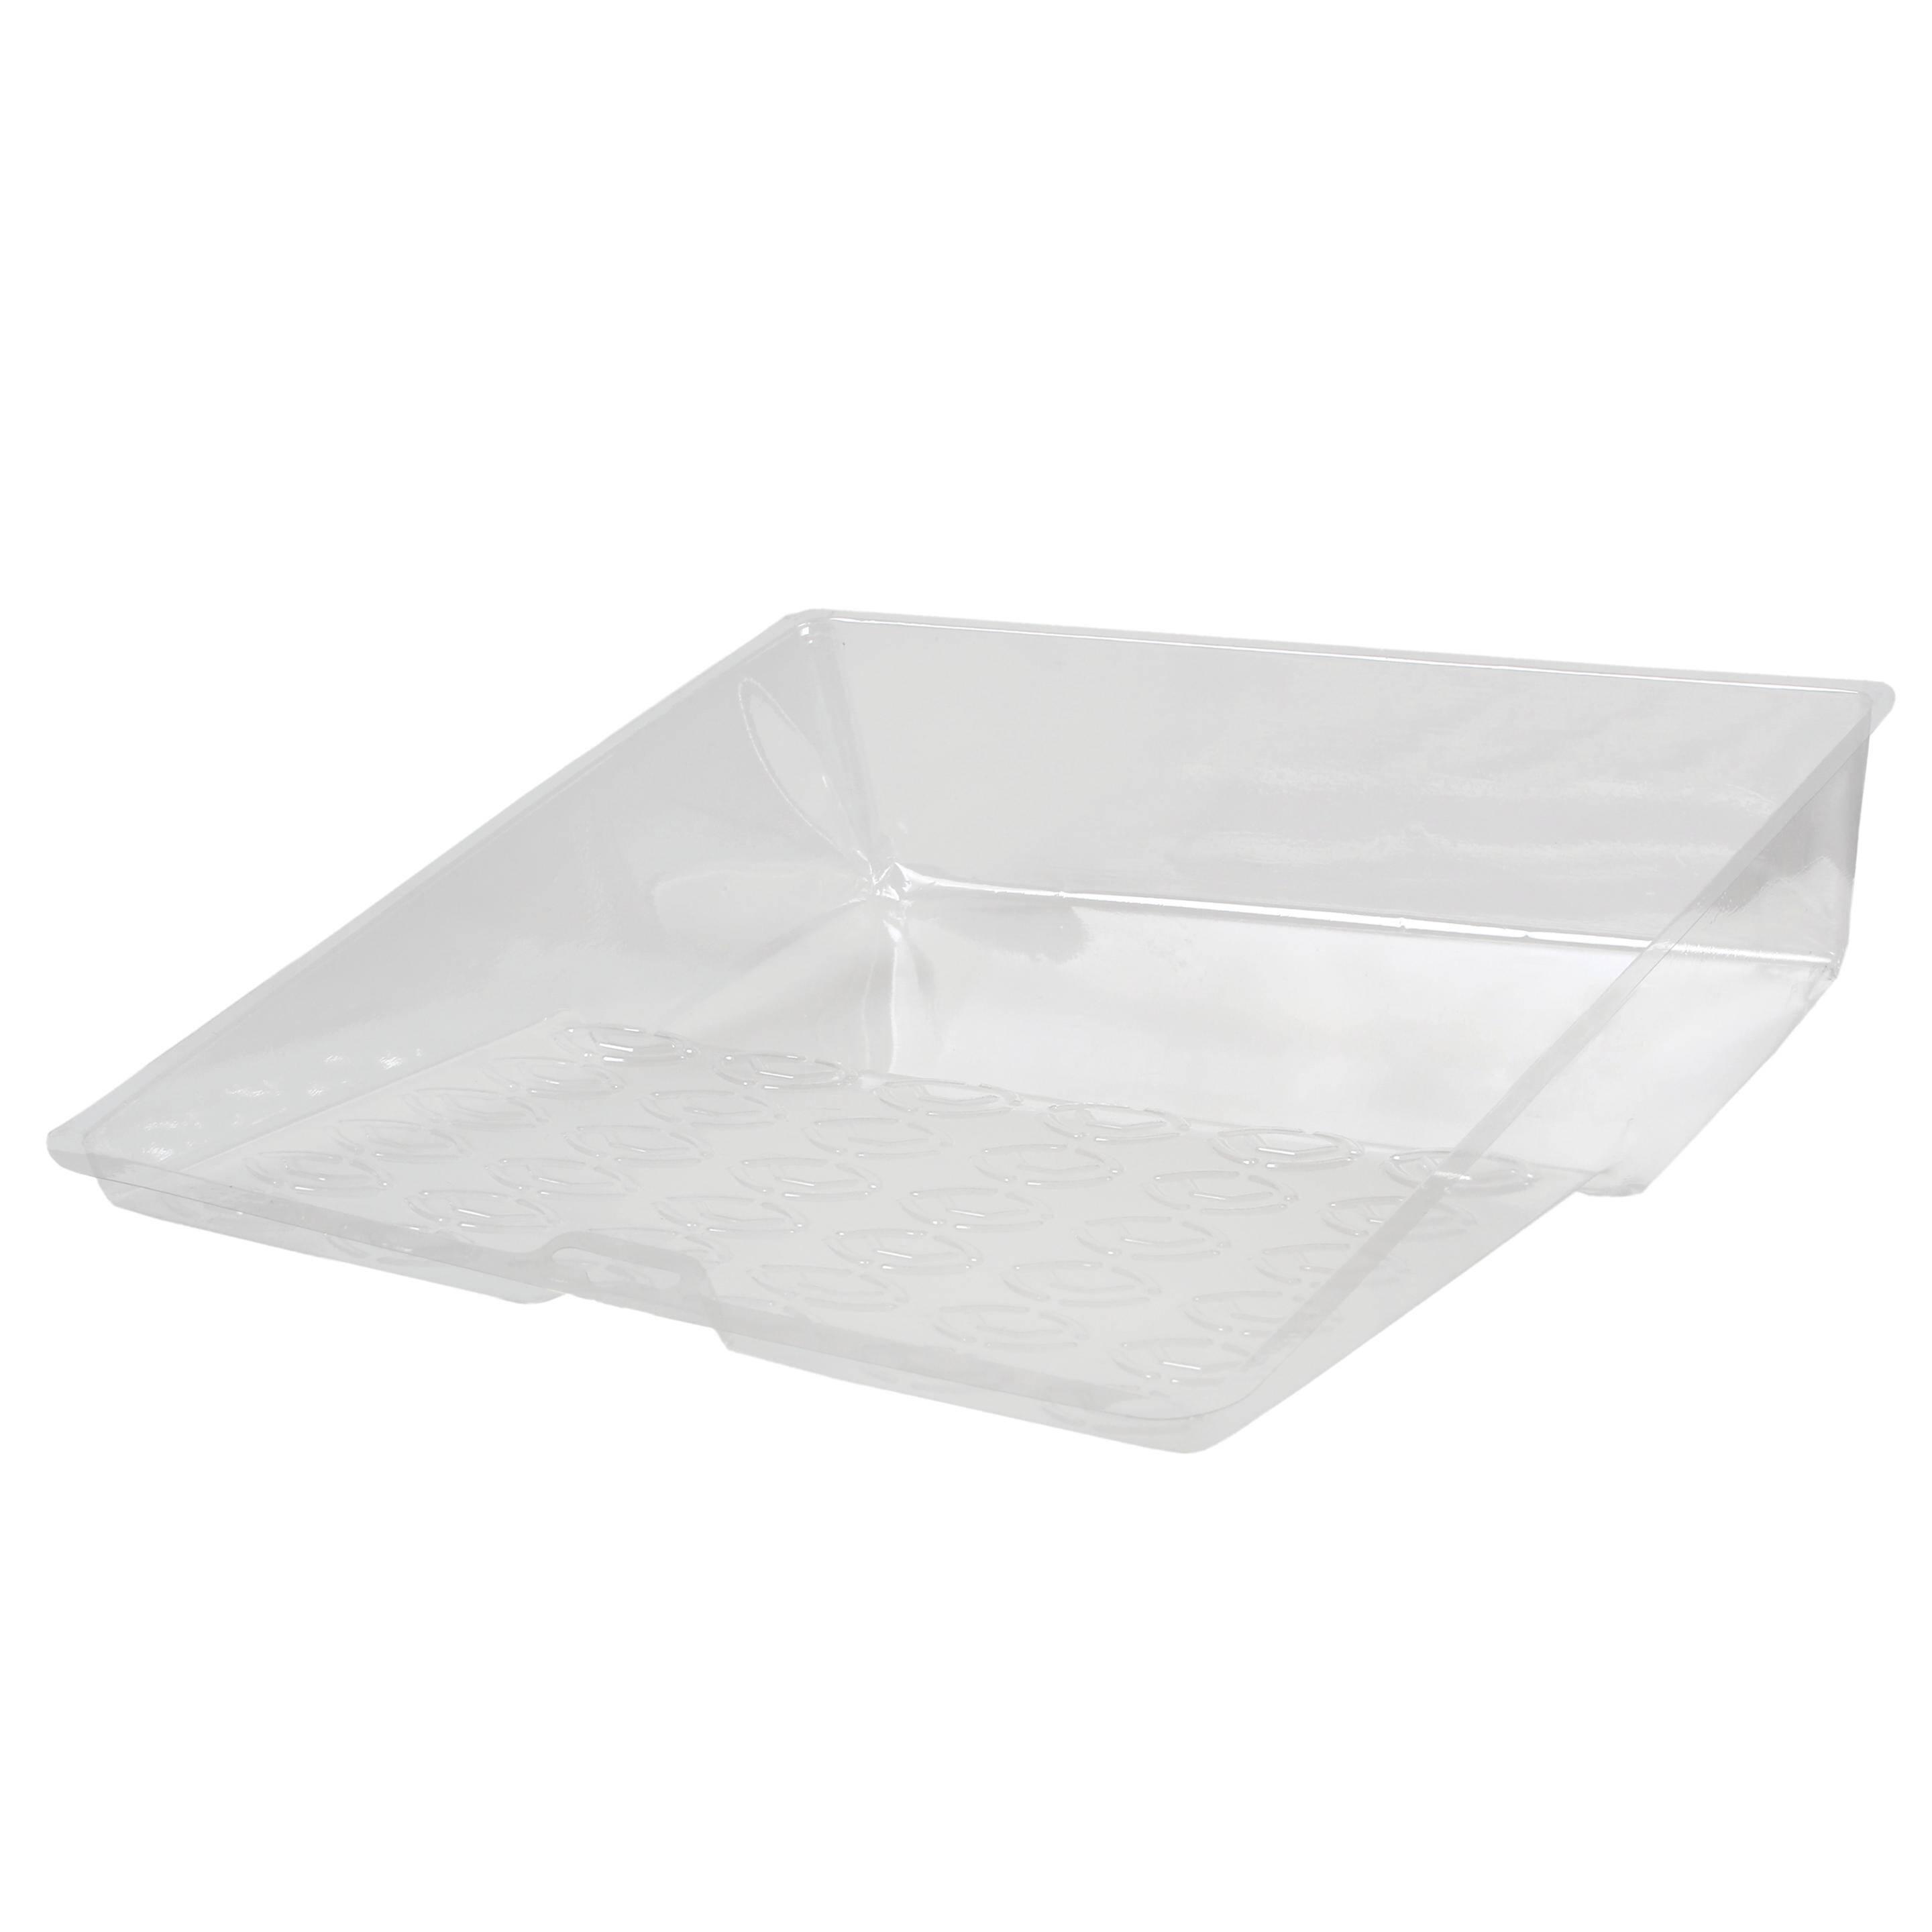 Paint tray liner 16/28cm